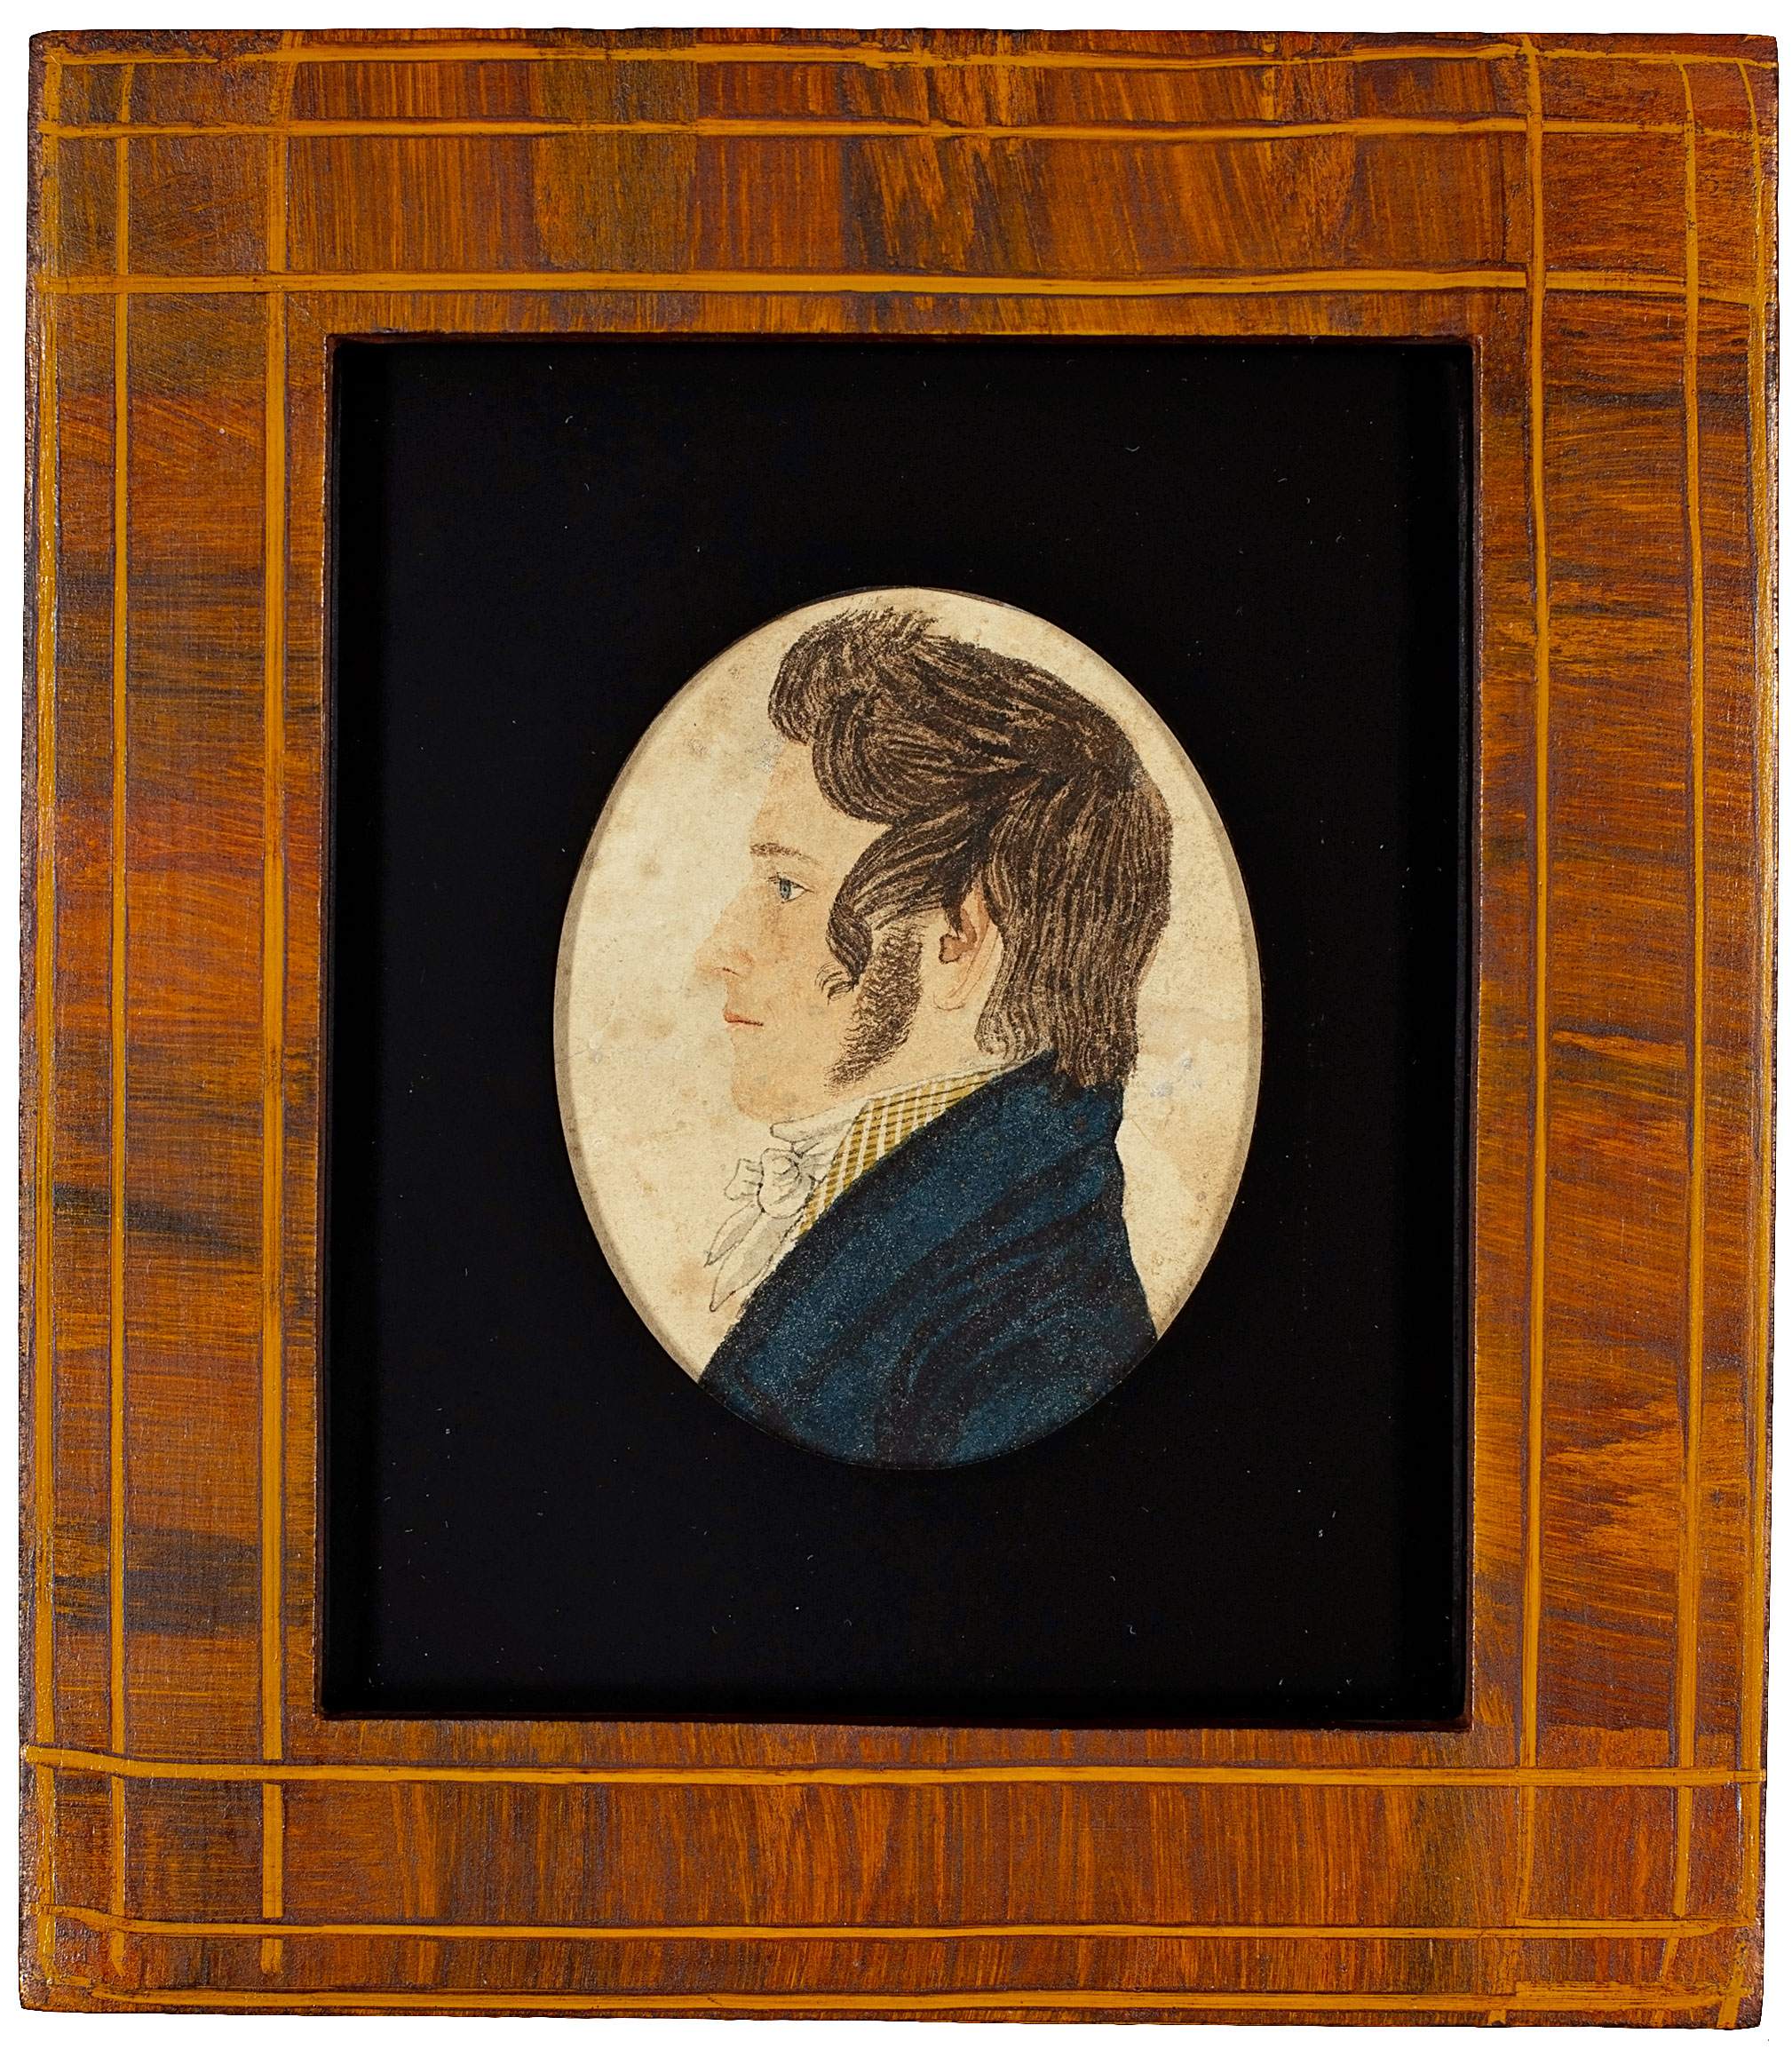 Attributed to Rufus Porter, Thomas Long, ca. 1815–17